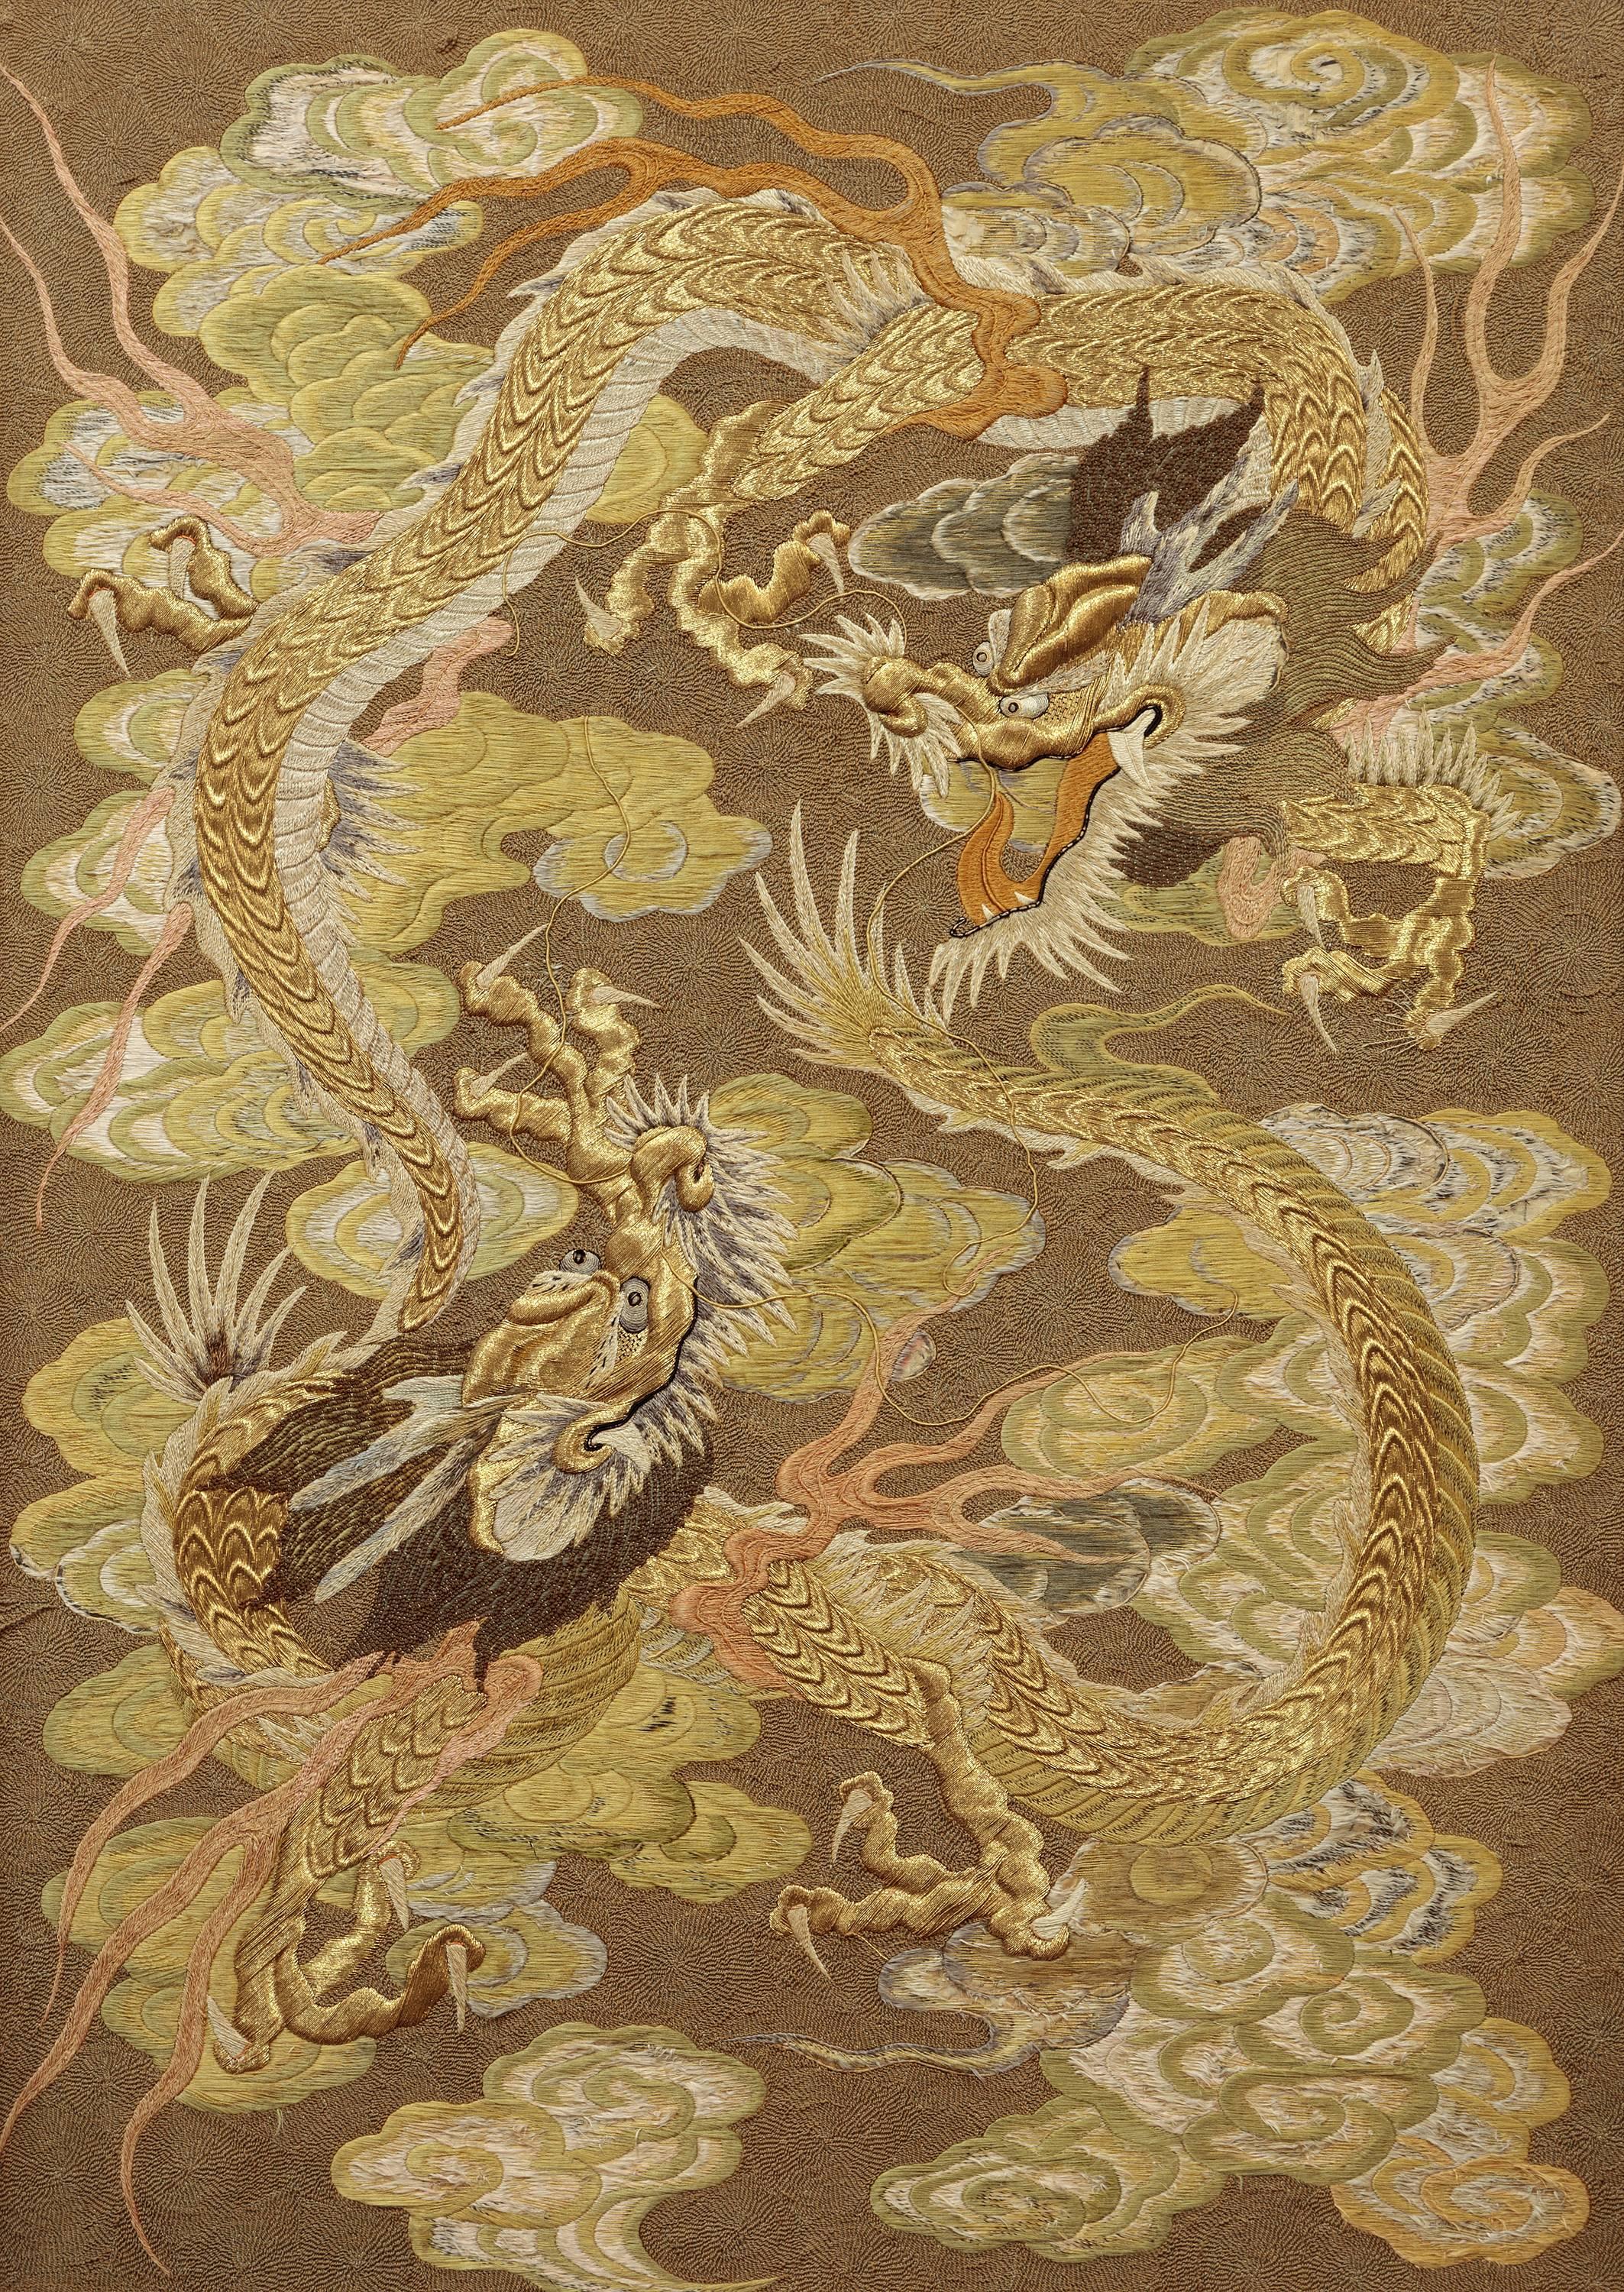 Silk Embroidery with Dragons - Art by Unknown